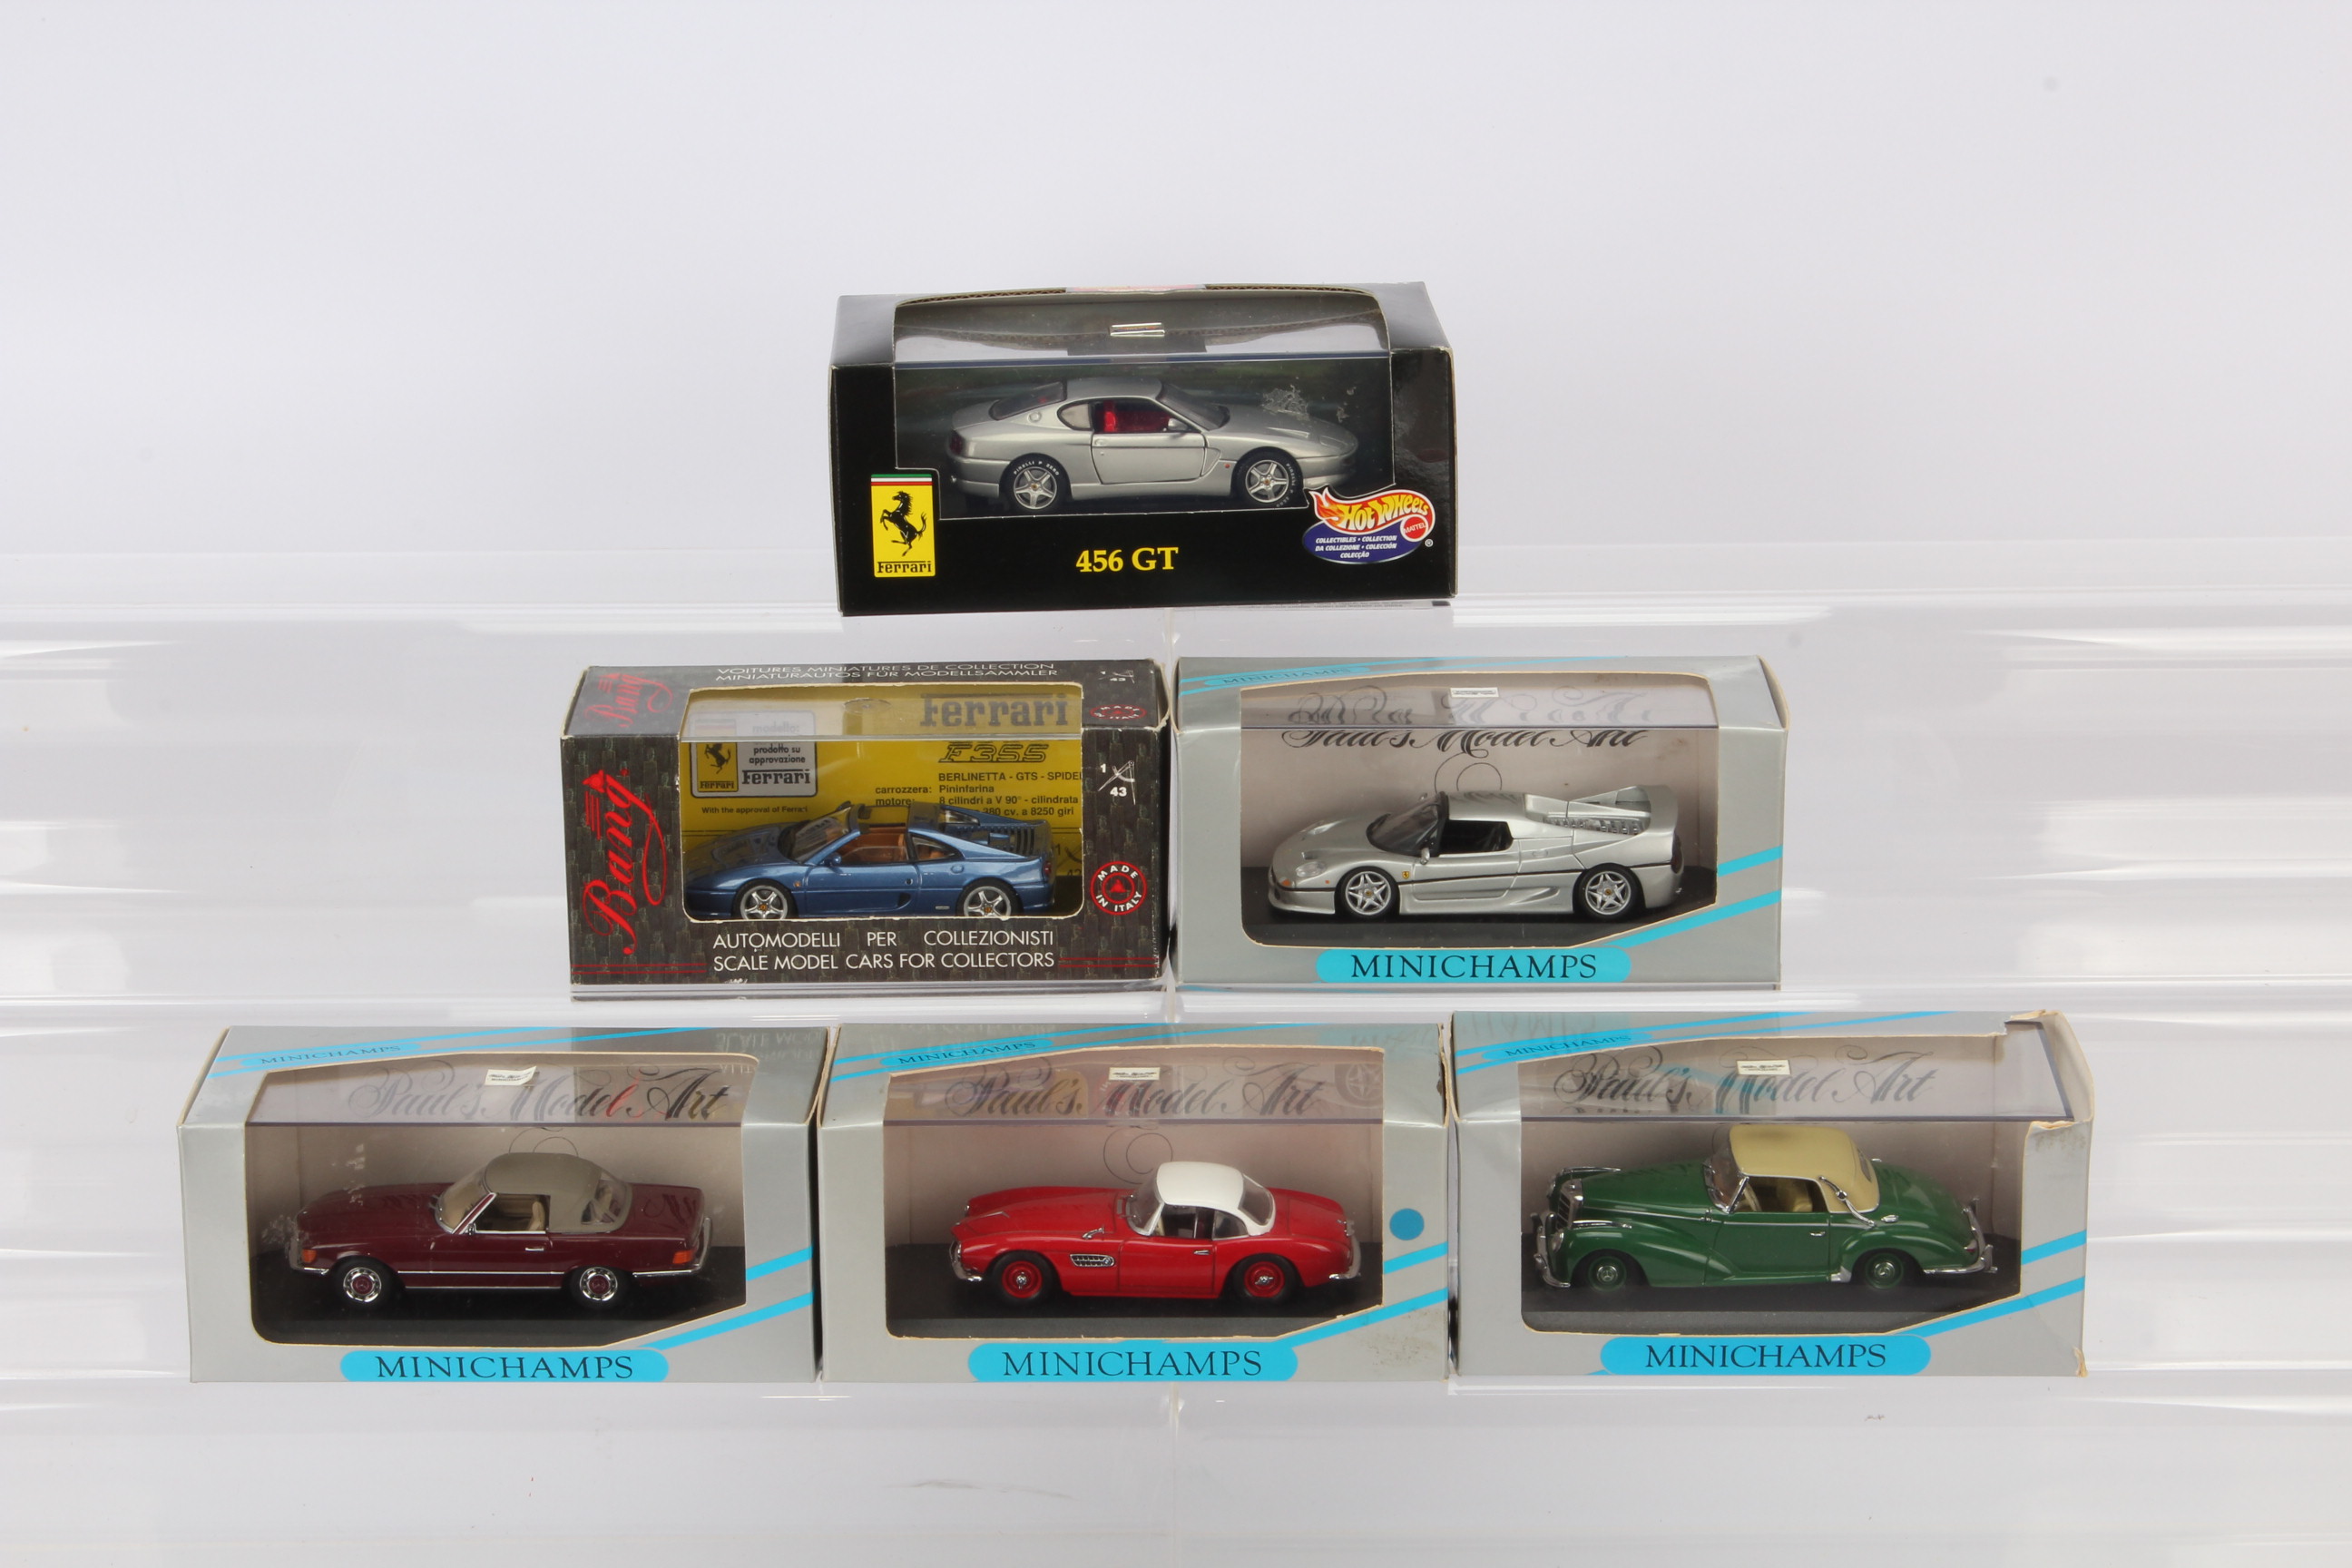 Minichamps and Other Modern Diecast Cars, all cased with card sleeves, 1:43 scale, Minichamps, 430